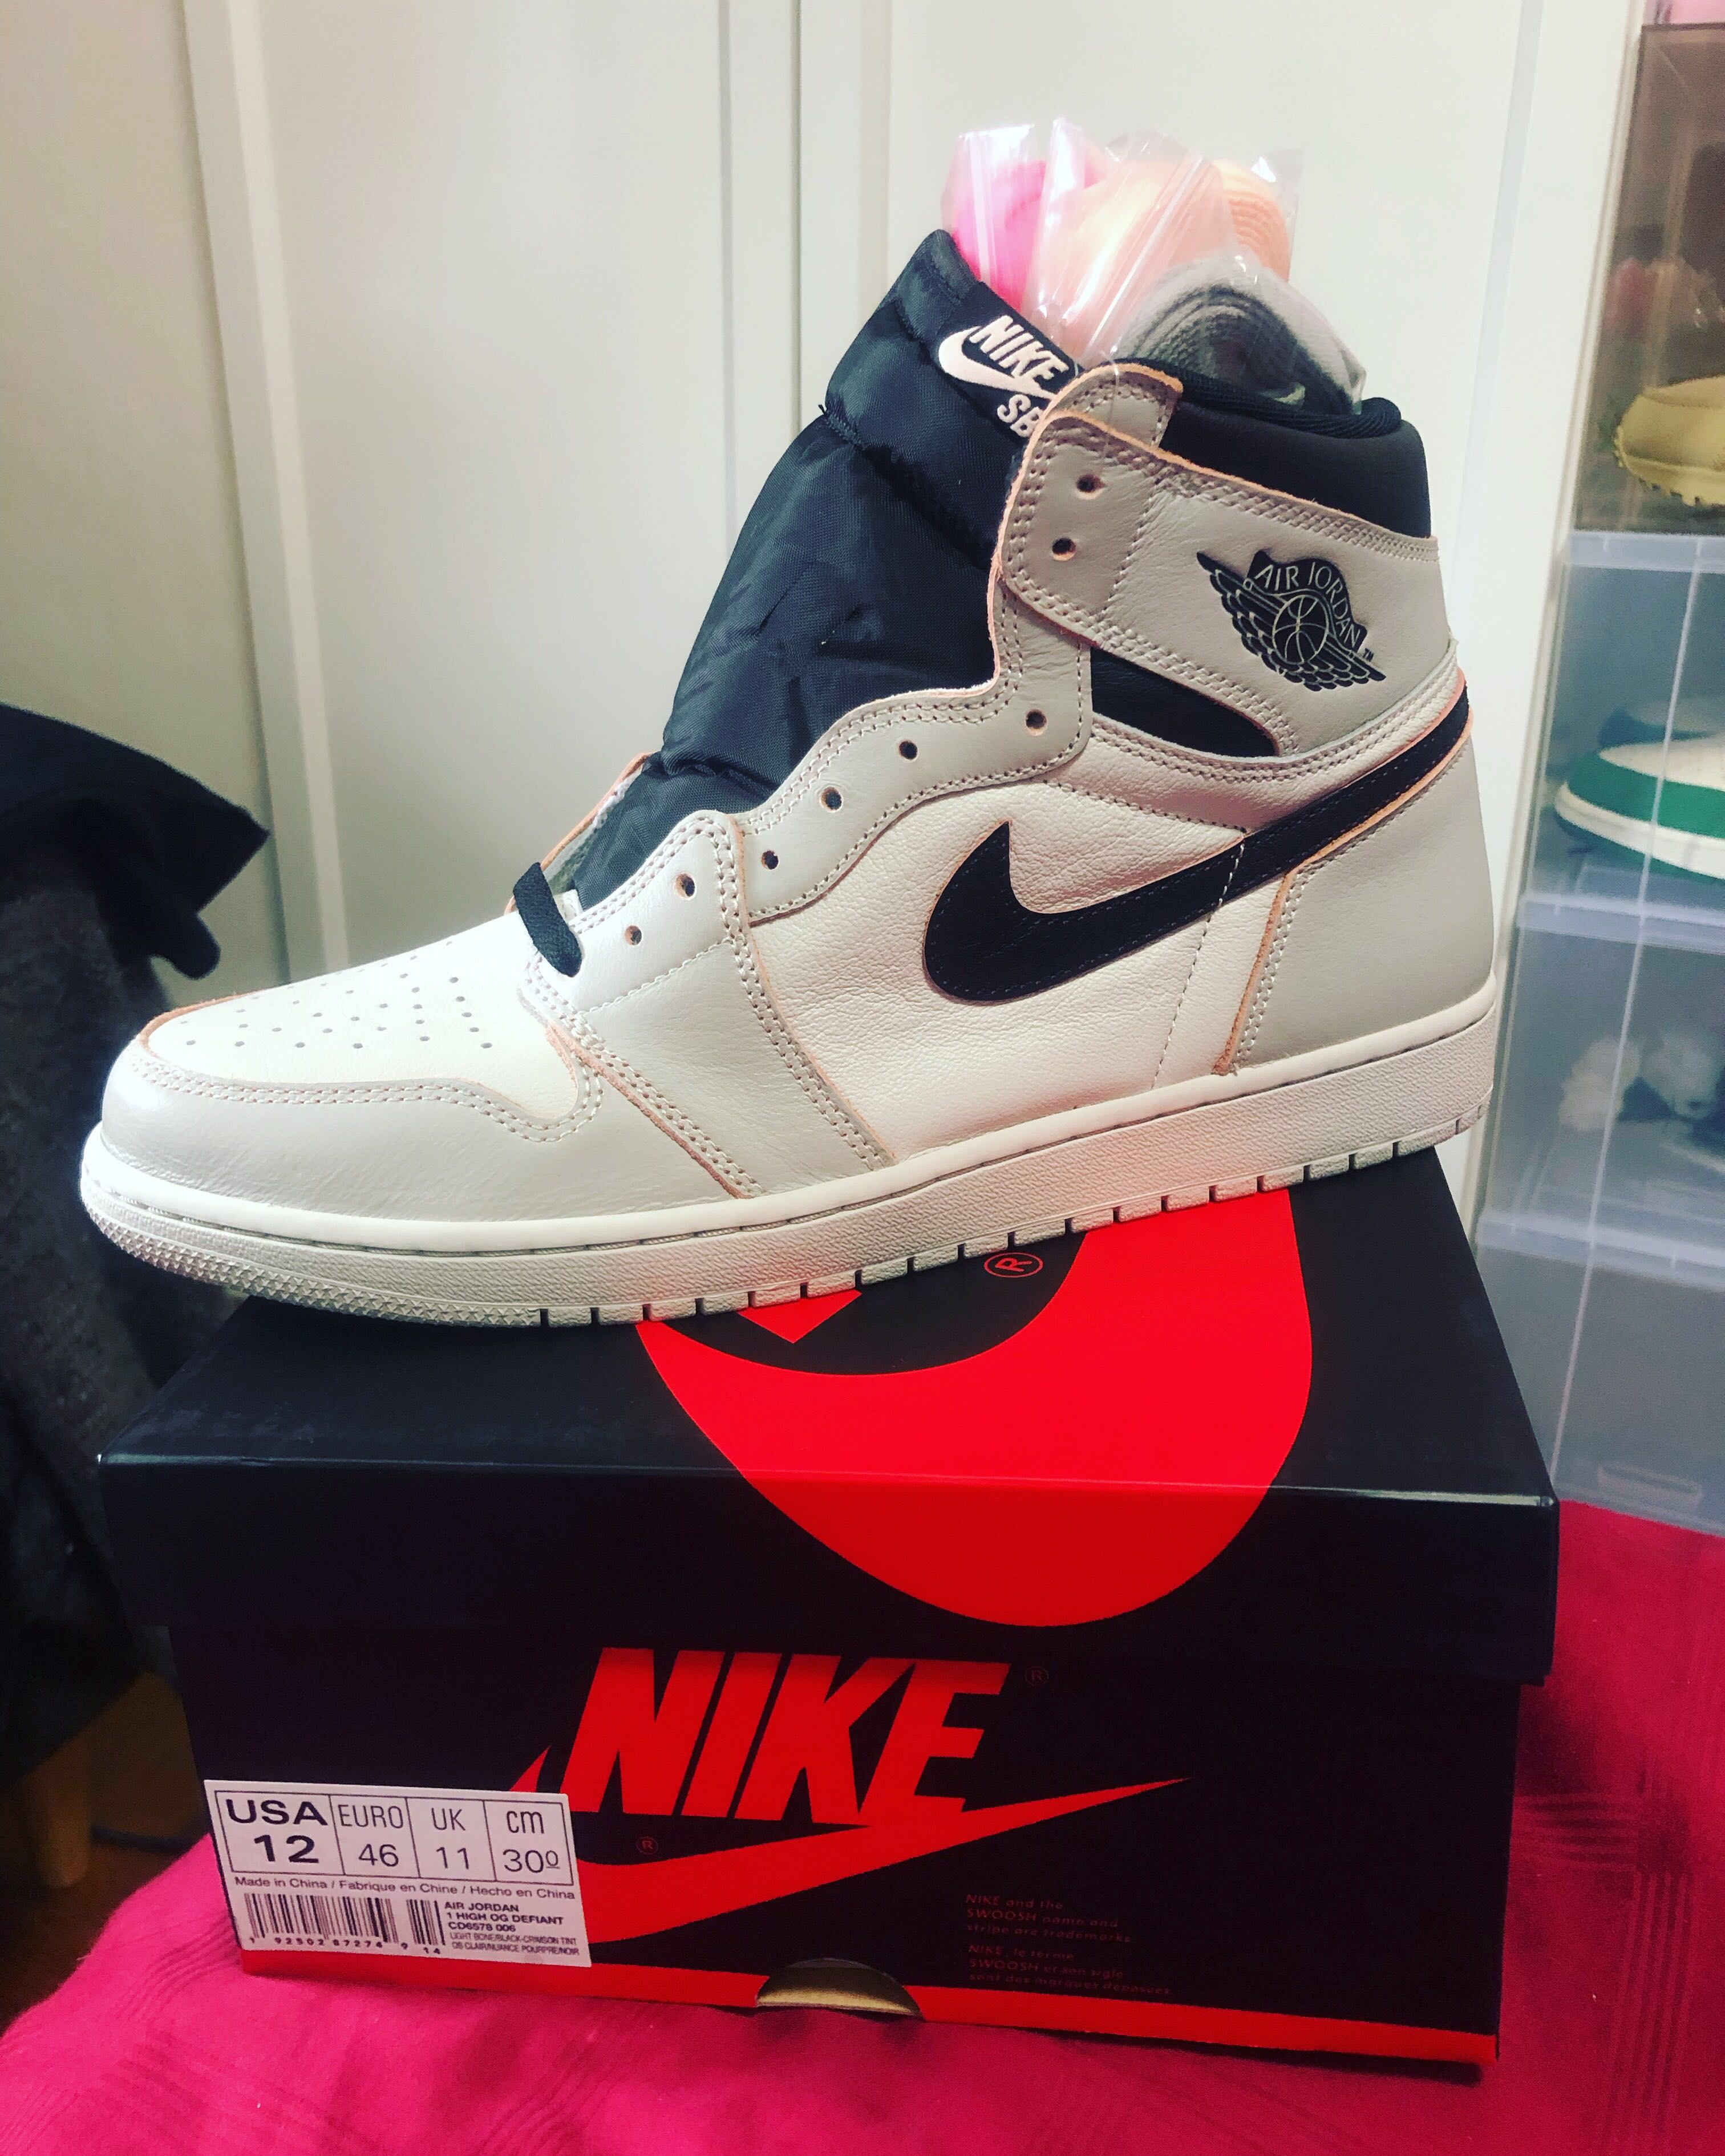 WTS Nike Air Jordan NYC to Paris US12 with tag!, Men's Fashion, Footwear, Sneakers on Carousell